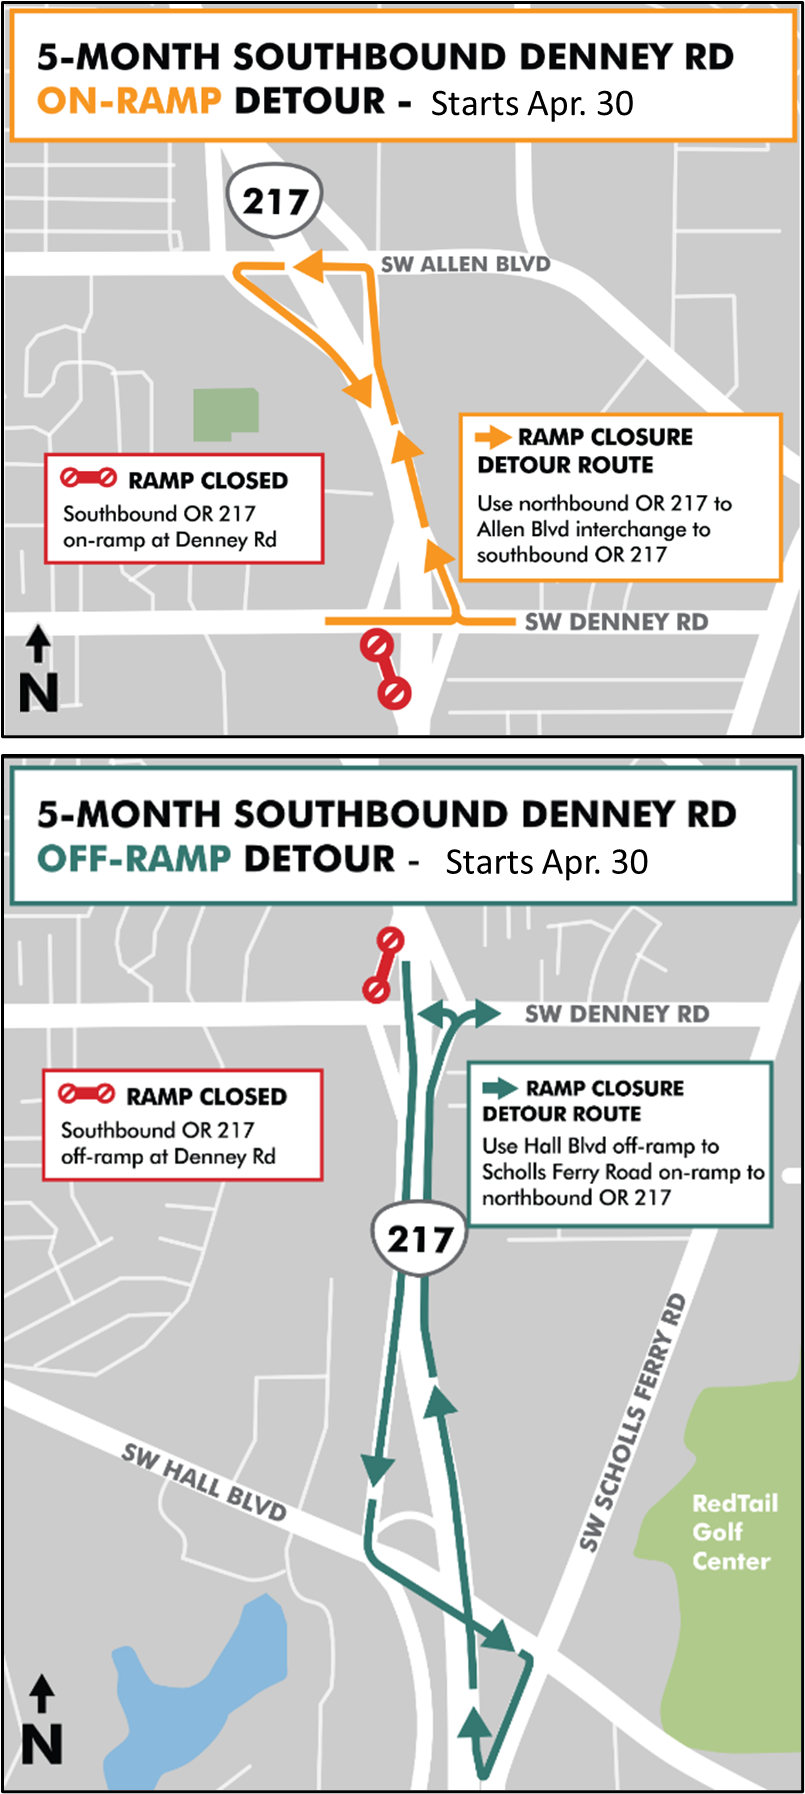 Denney Road on-ramp and off-ramp detour maps